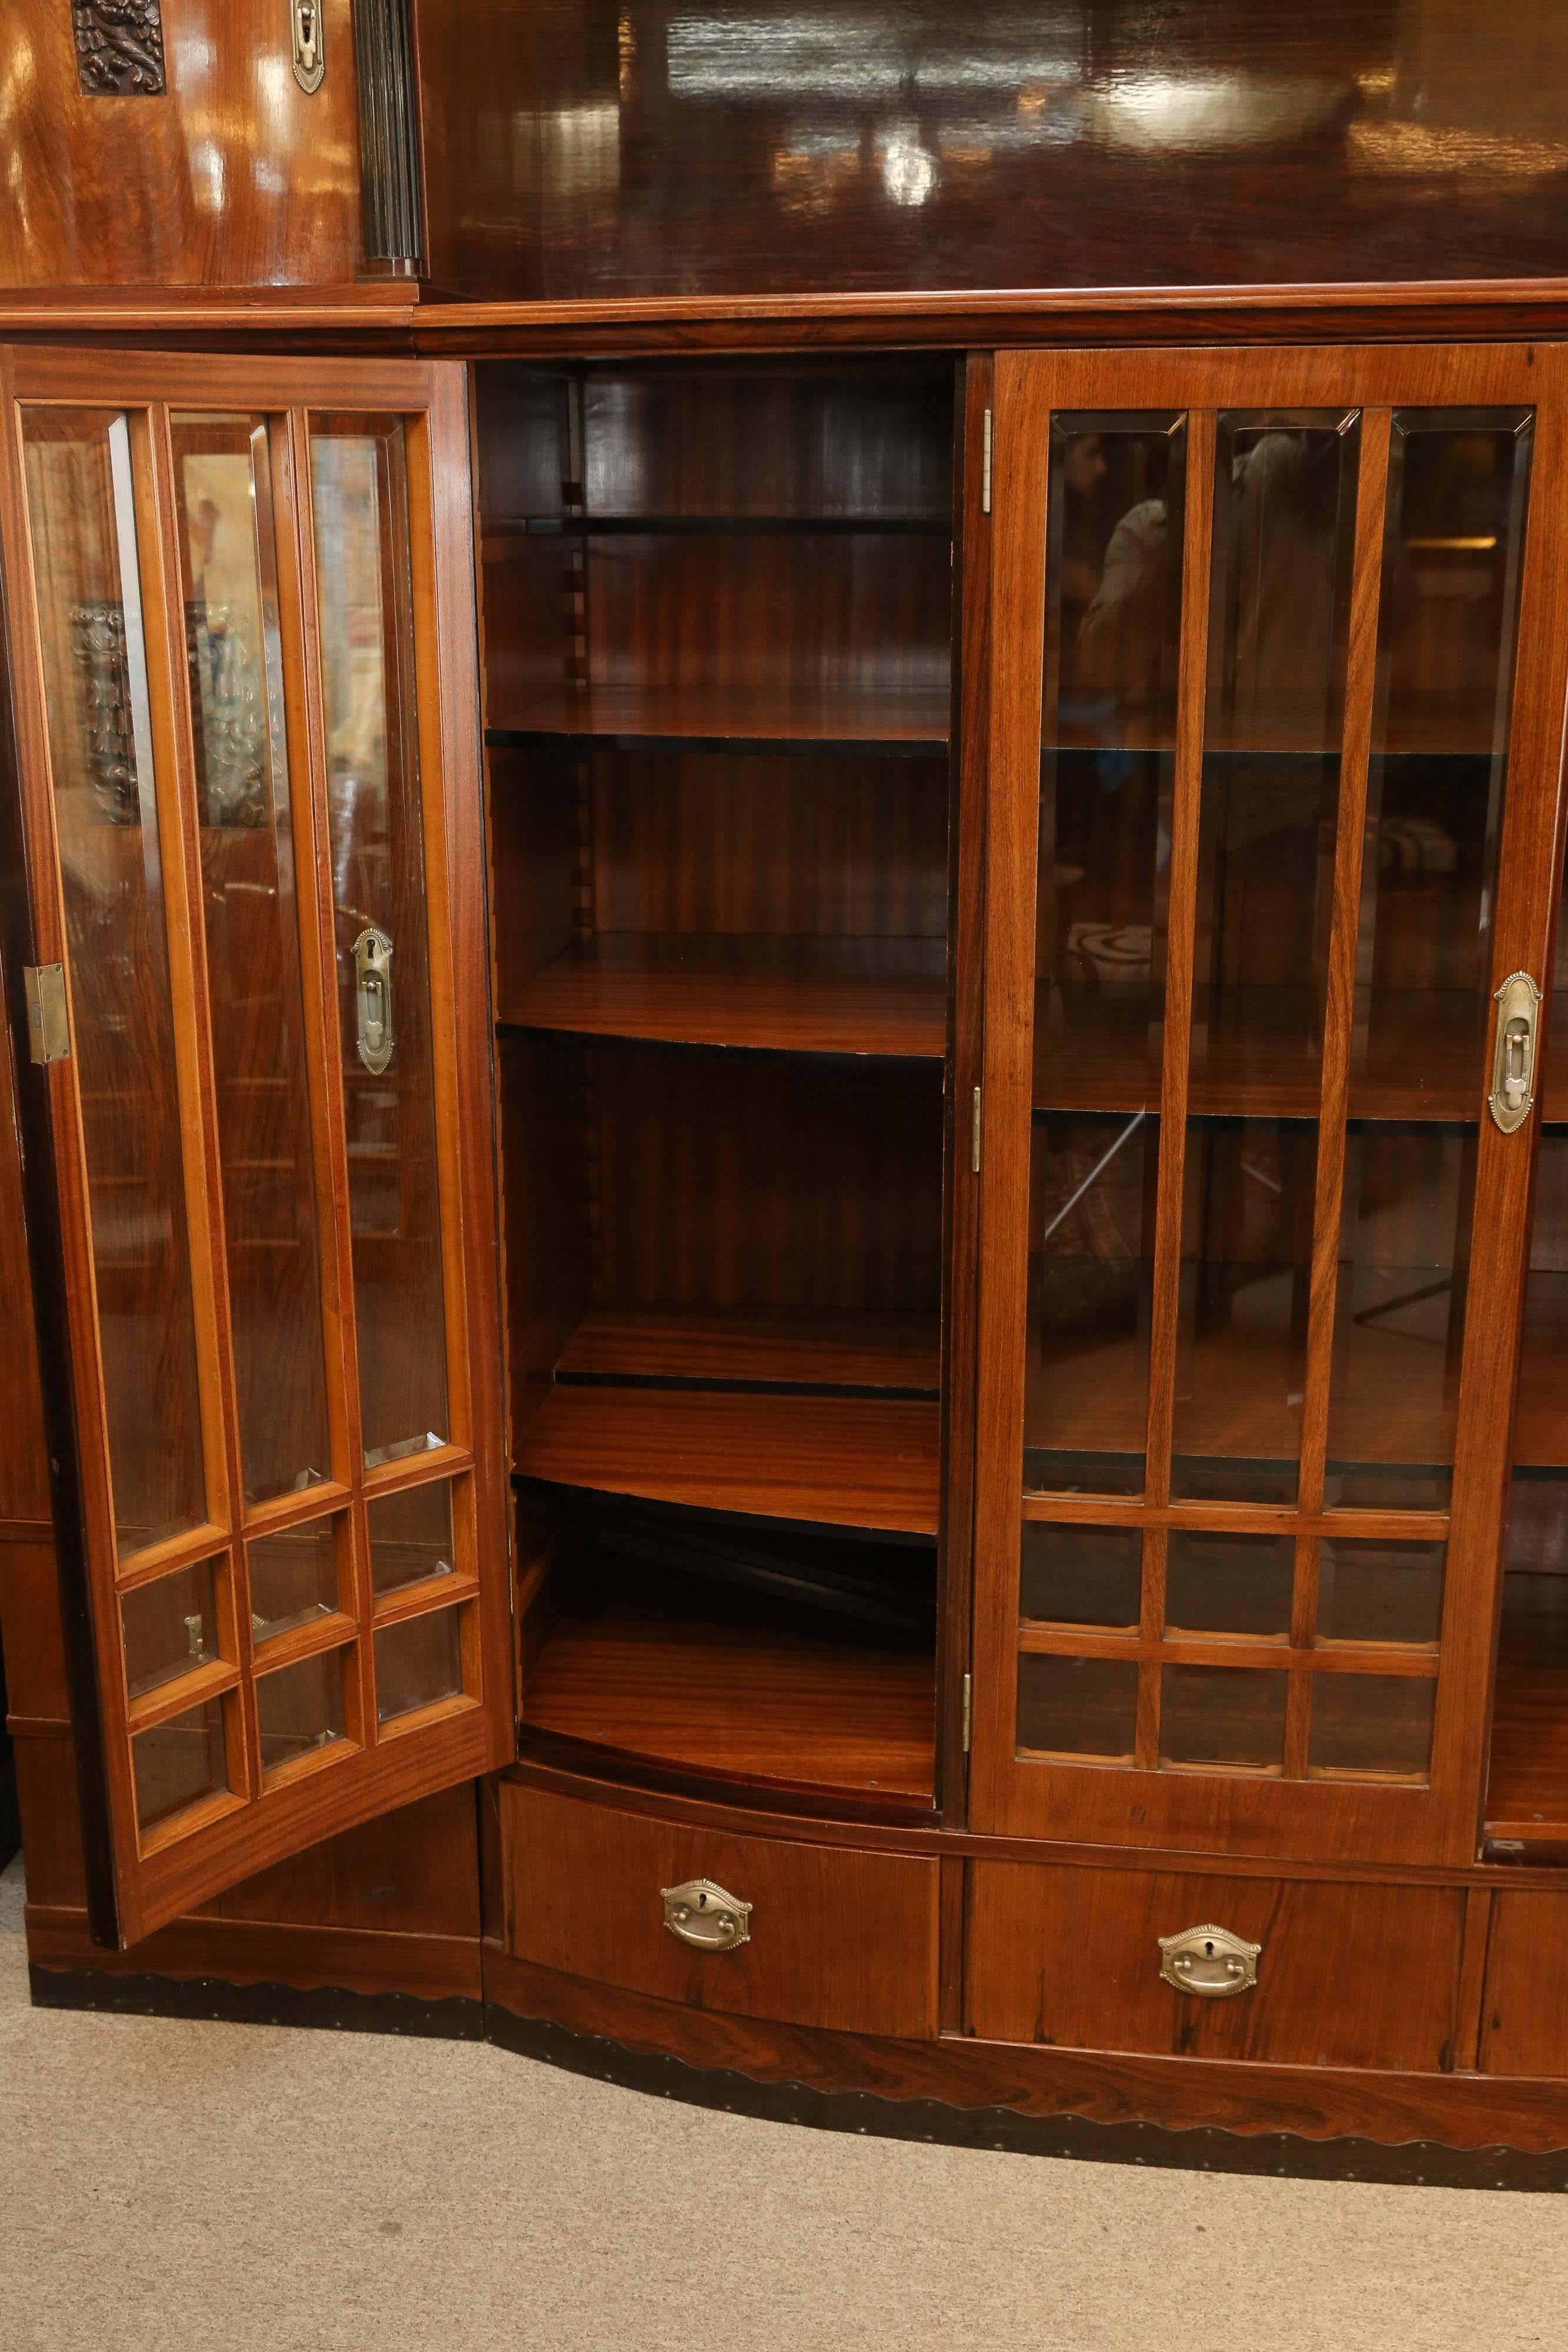 20th Century Hungarian Credenza or Bookcase in Palisander Wood from Art Deco period For Sale